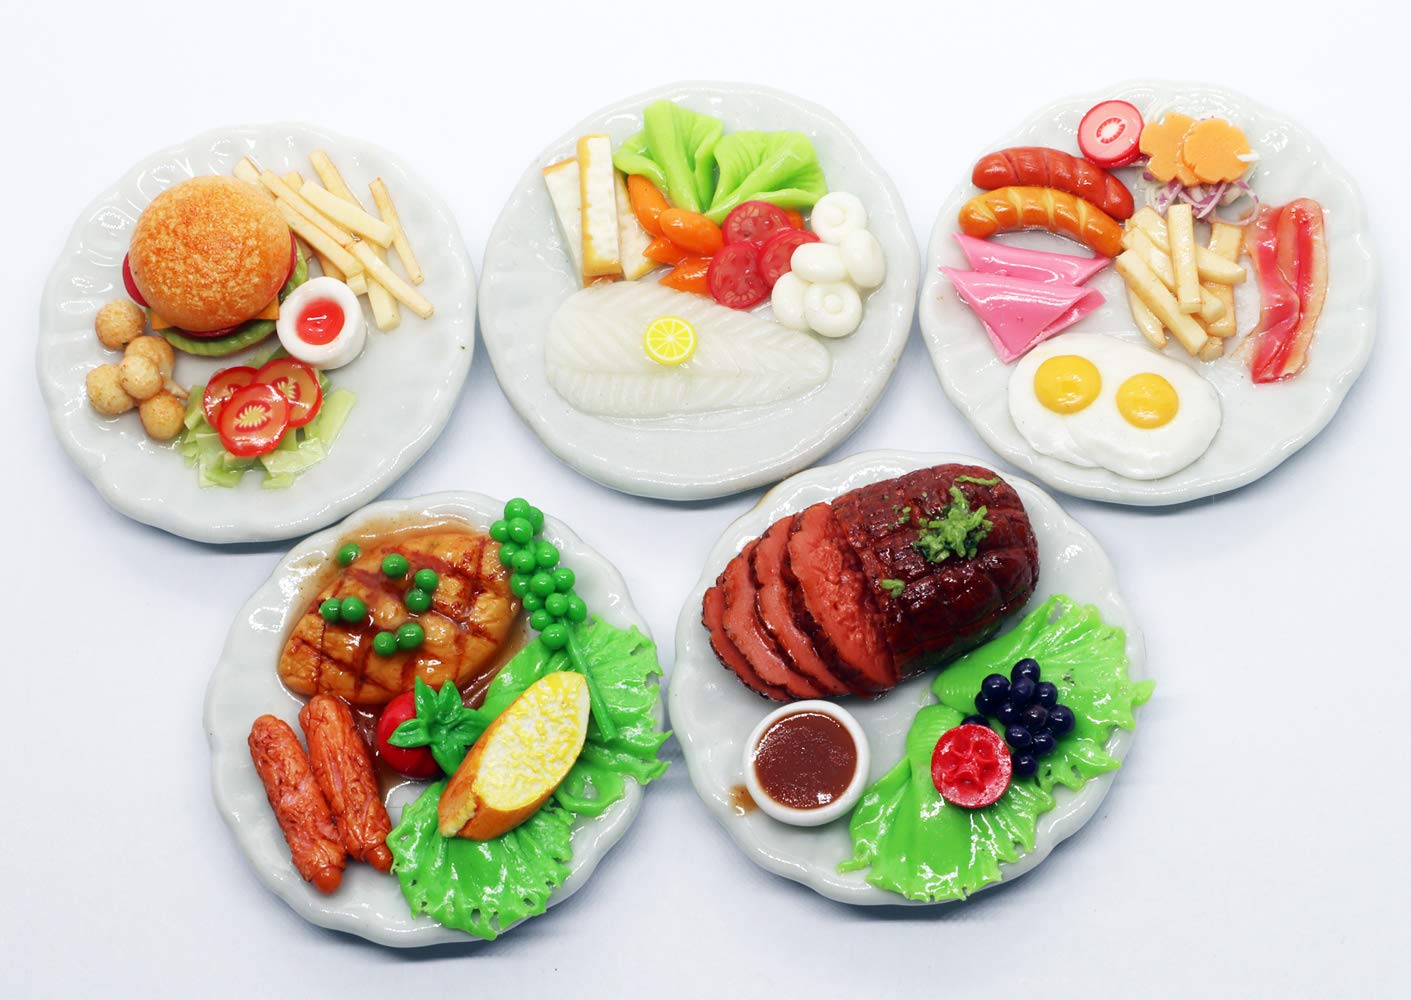 ThaiHonest Set 5 Assorted Dollhouse Miniature Food,Tiny Food On Ceramic Plate, Dollhouse Accessories for Collectibles